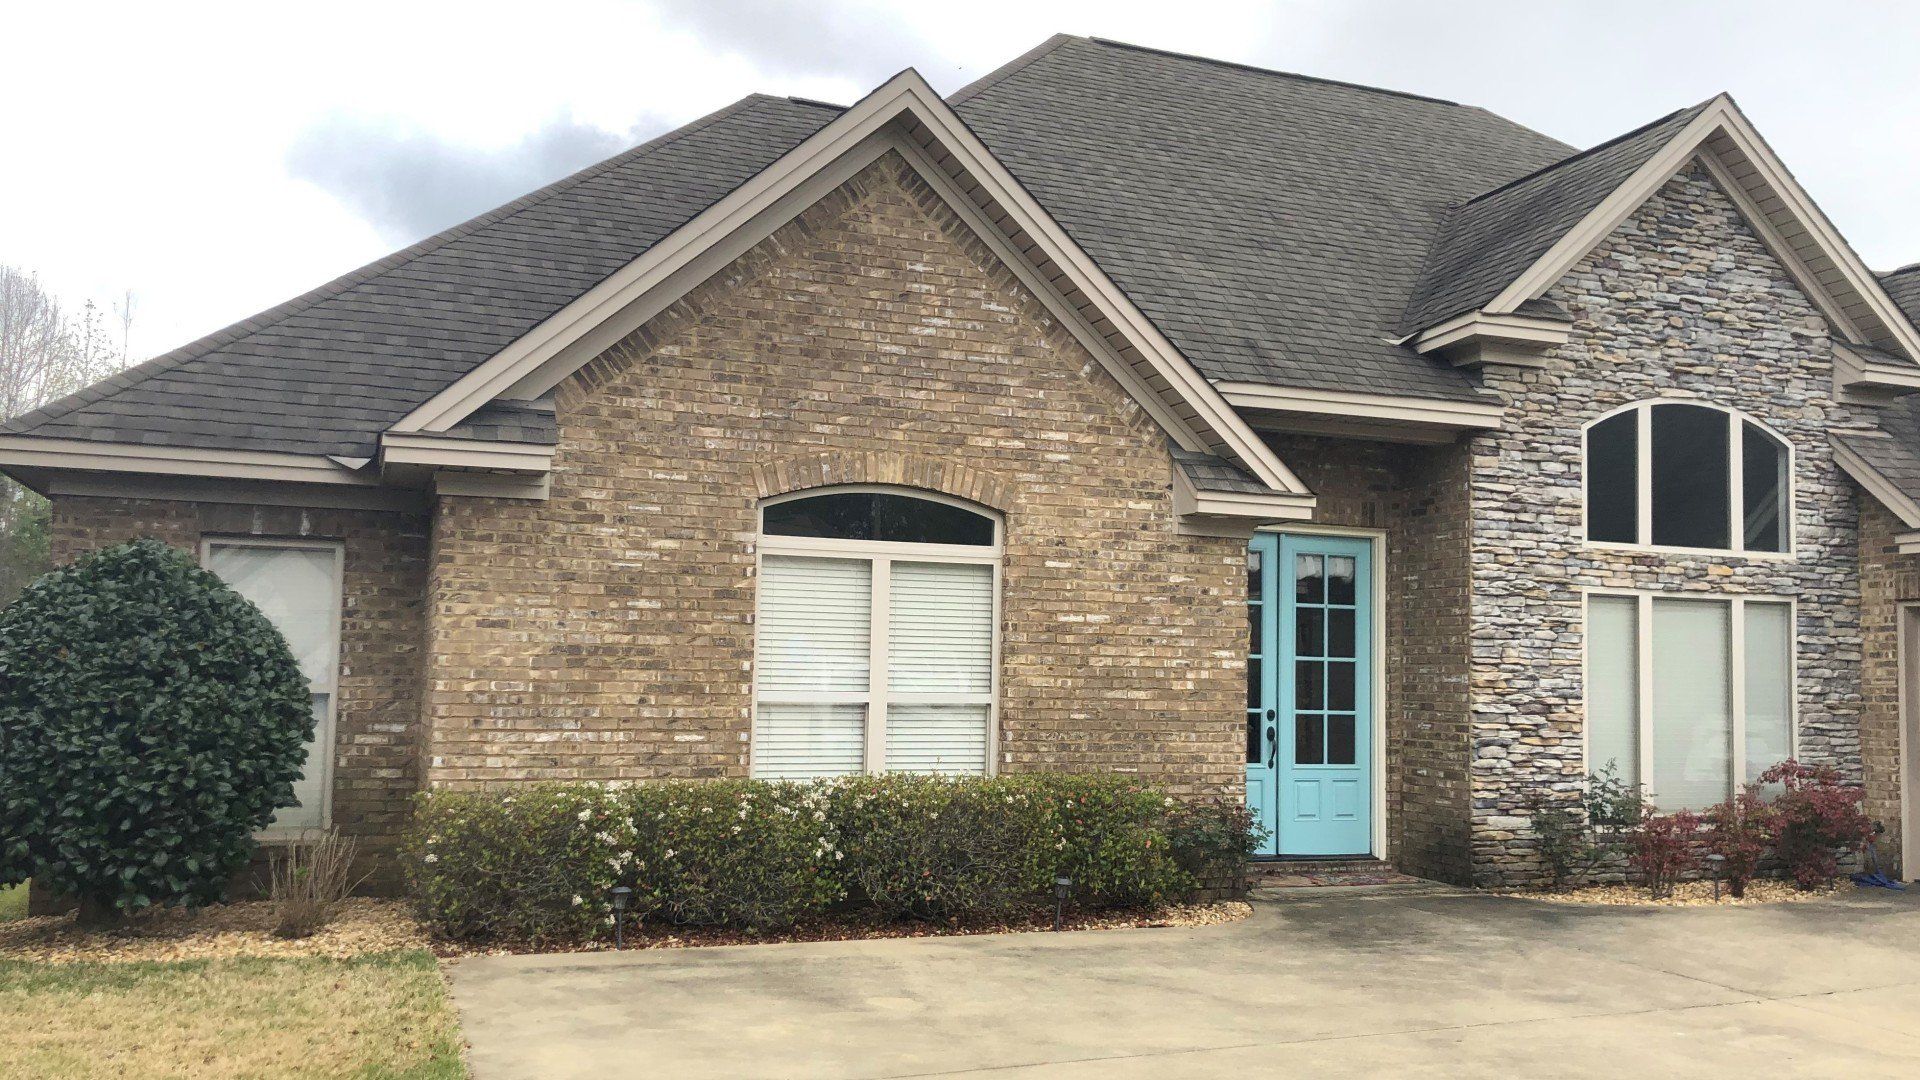 Before Industry Leading Heat rejection was gained with SPF Tint at this Prattville home - Residential tint in Prattville, AL